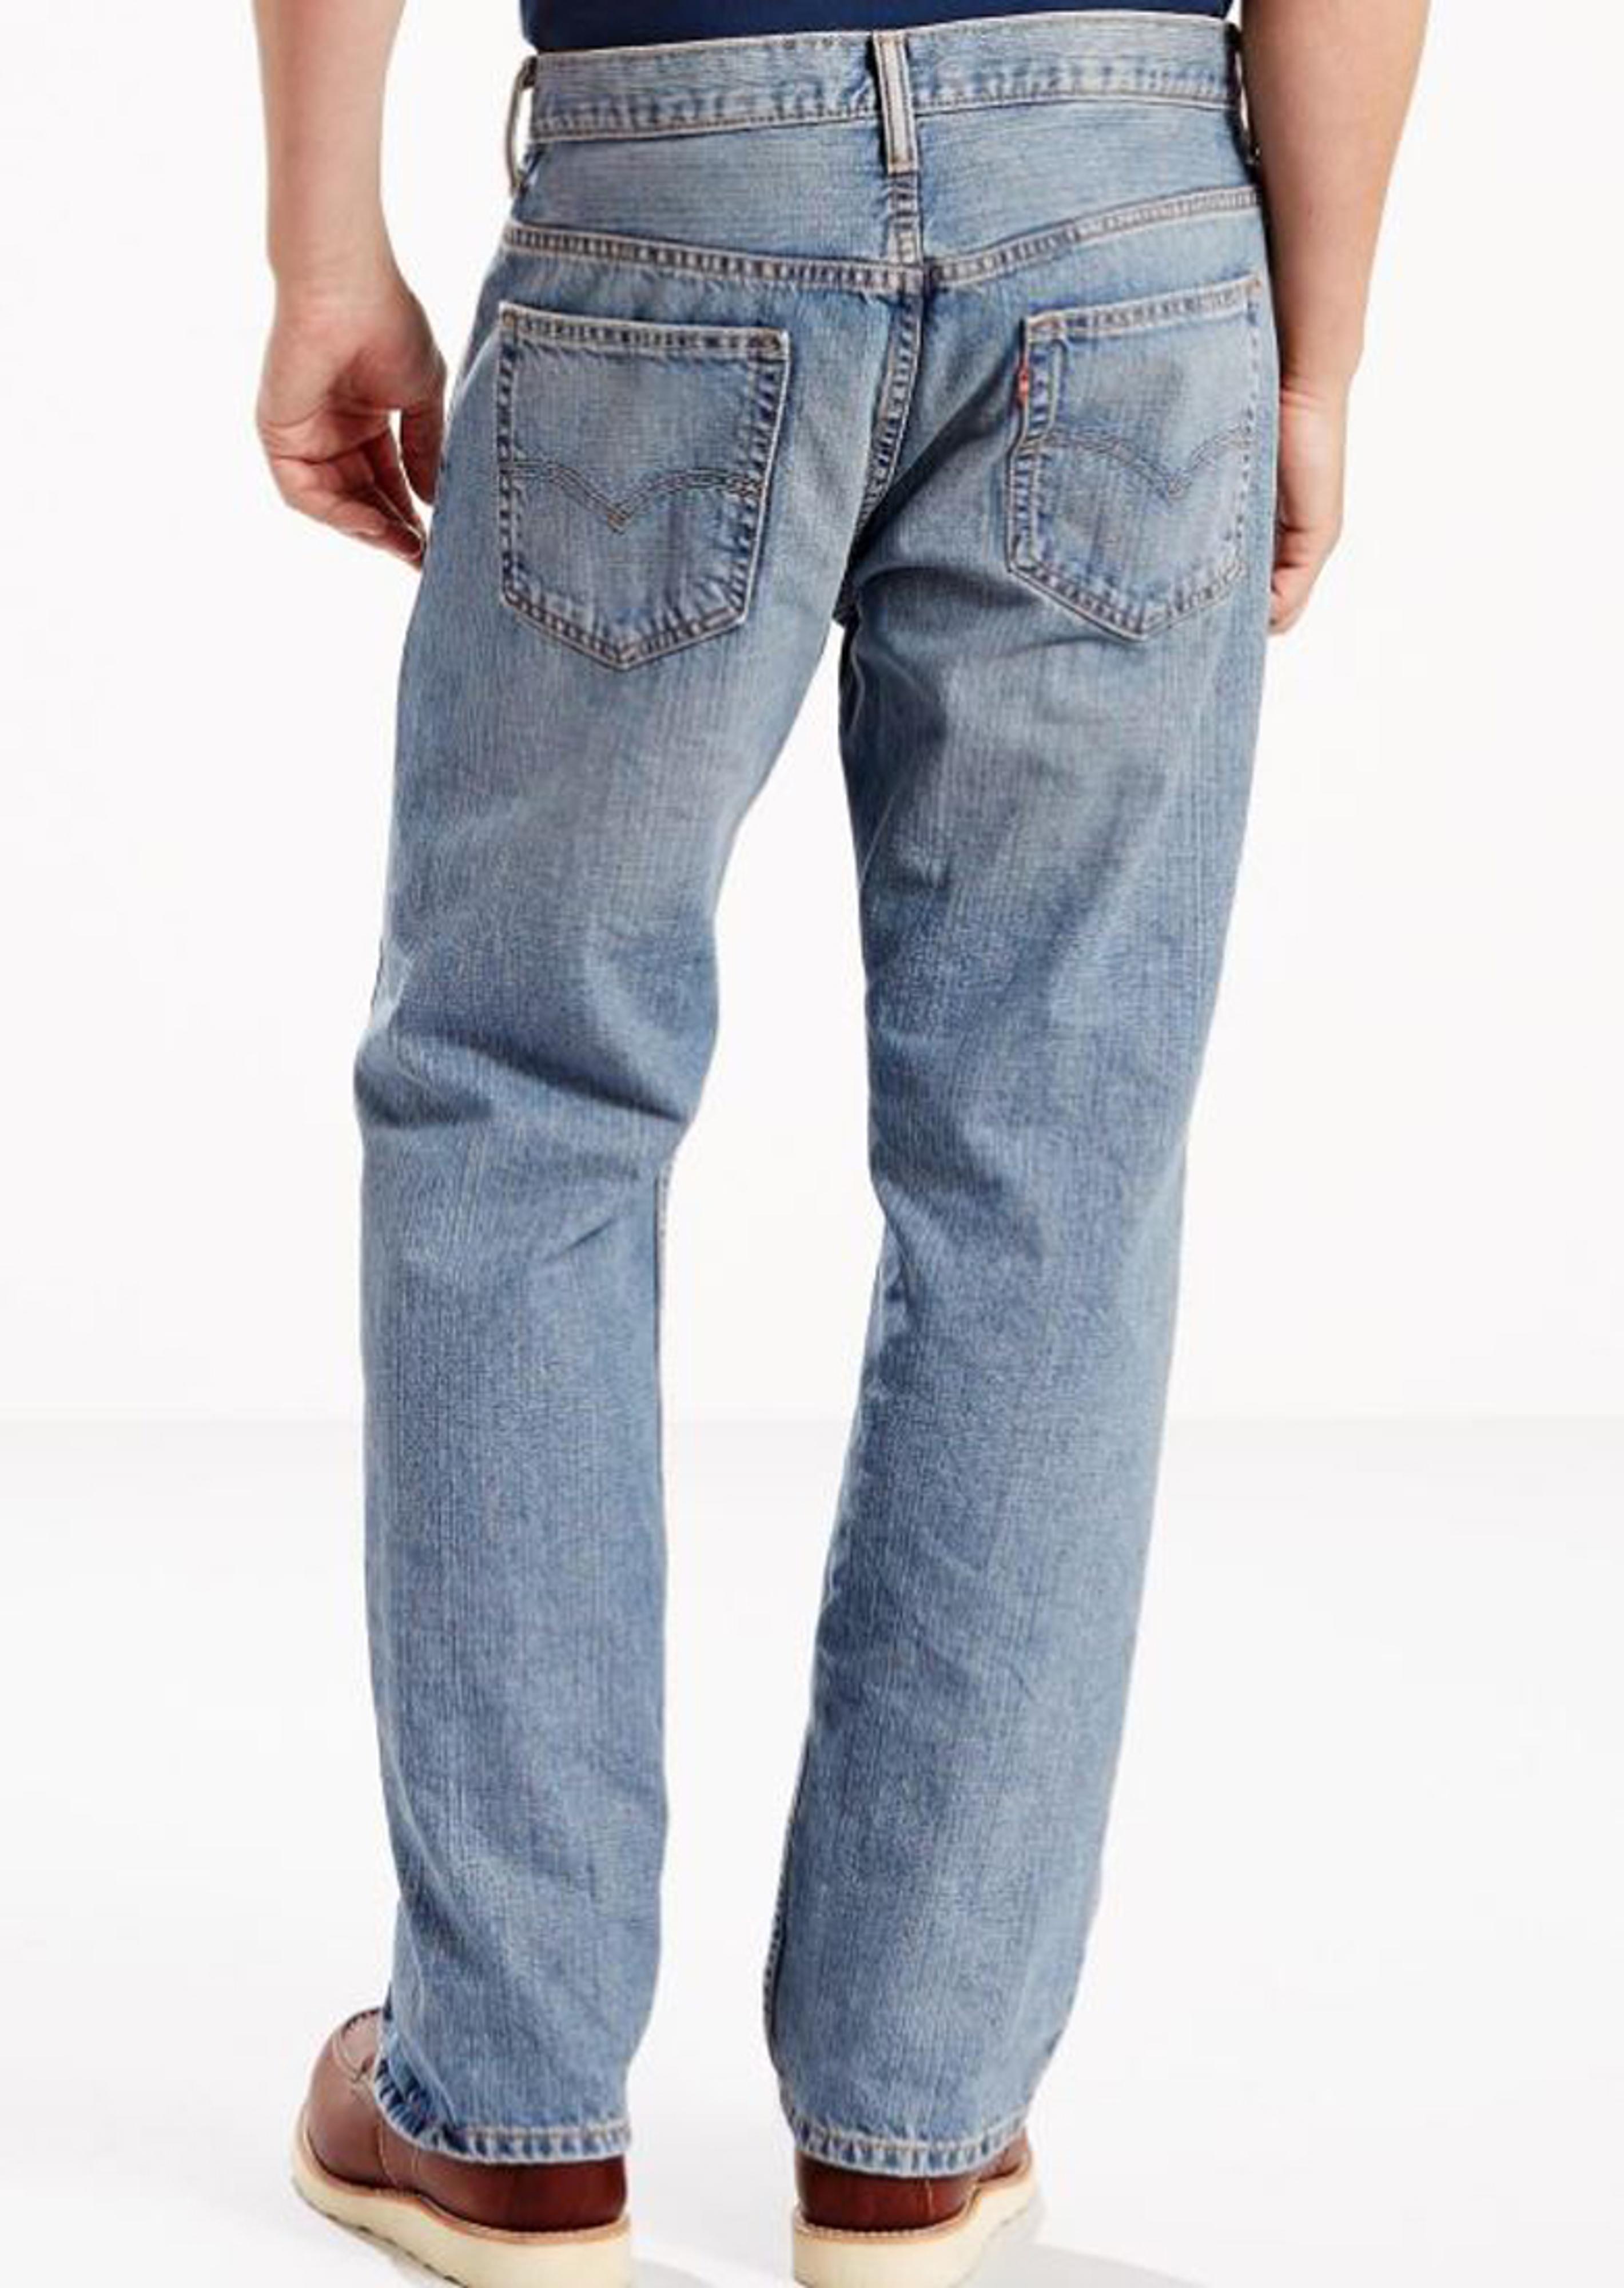 levis 569 mens jeans loose straight